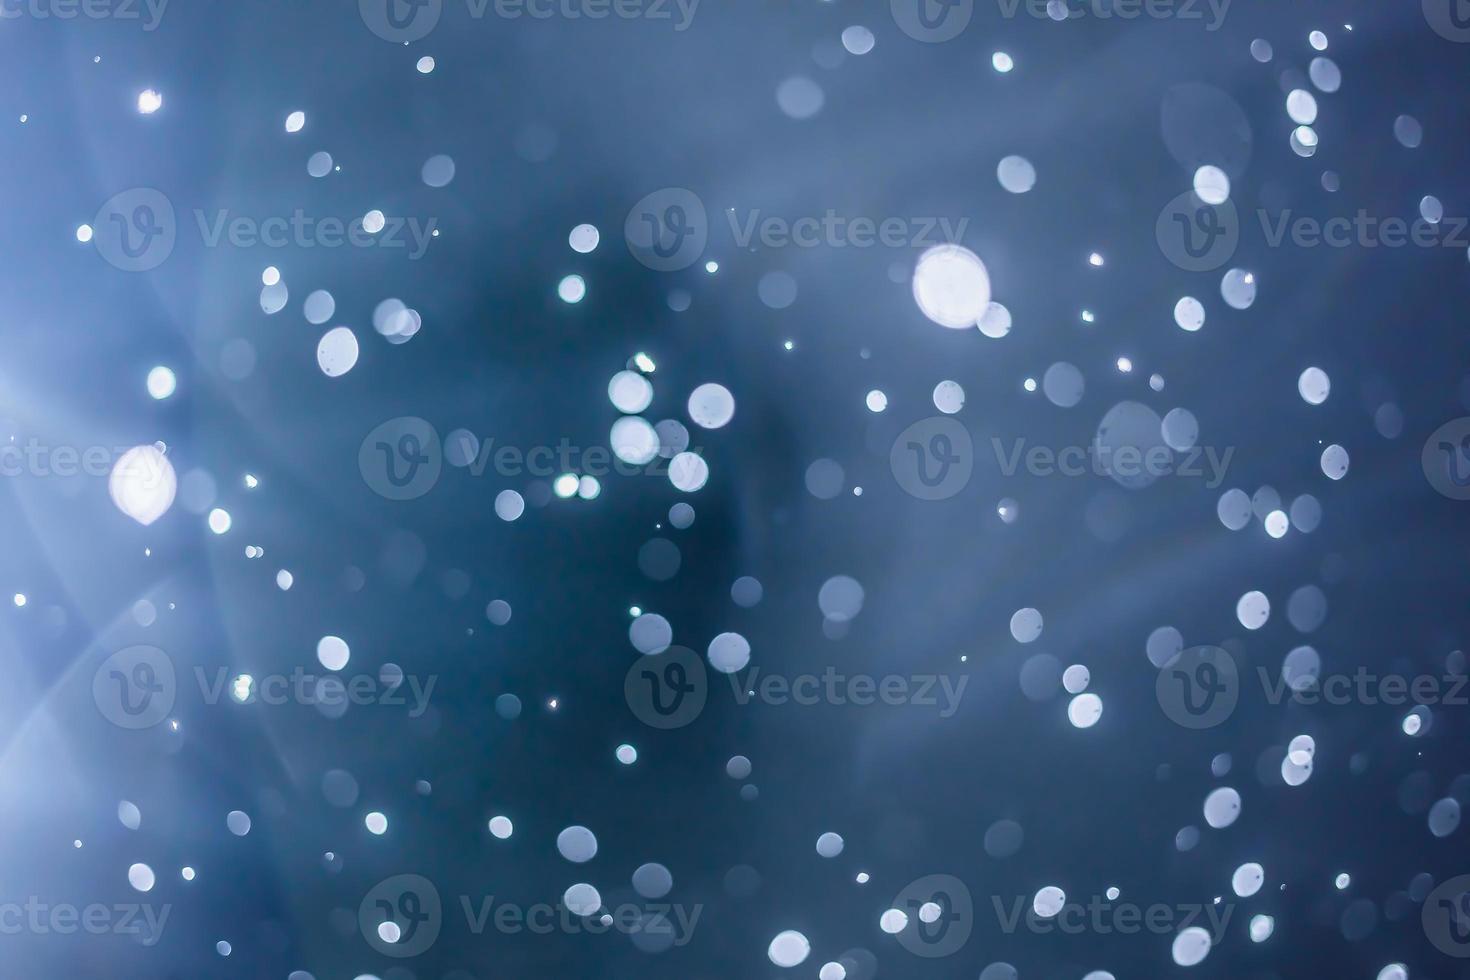 Wet and Smugy Lens Flare and Blurry Snowflakes during Snowstorm at Night photo